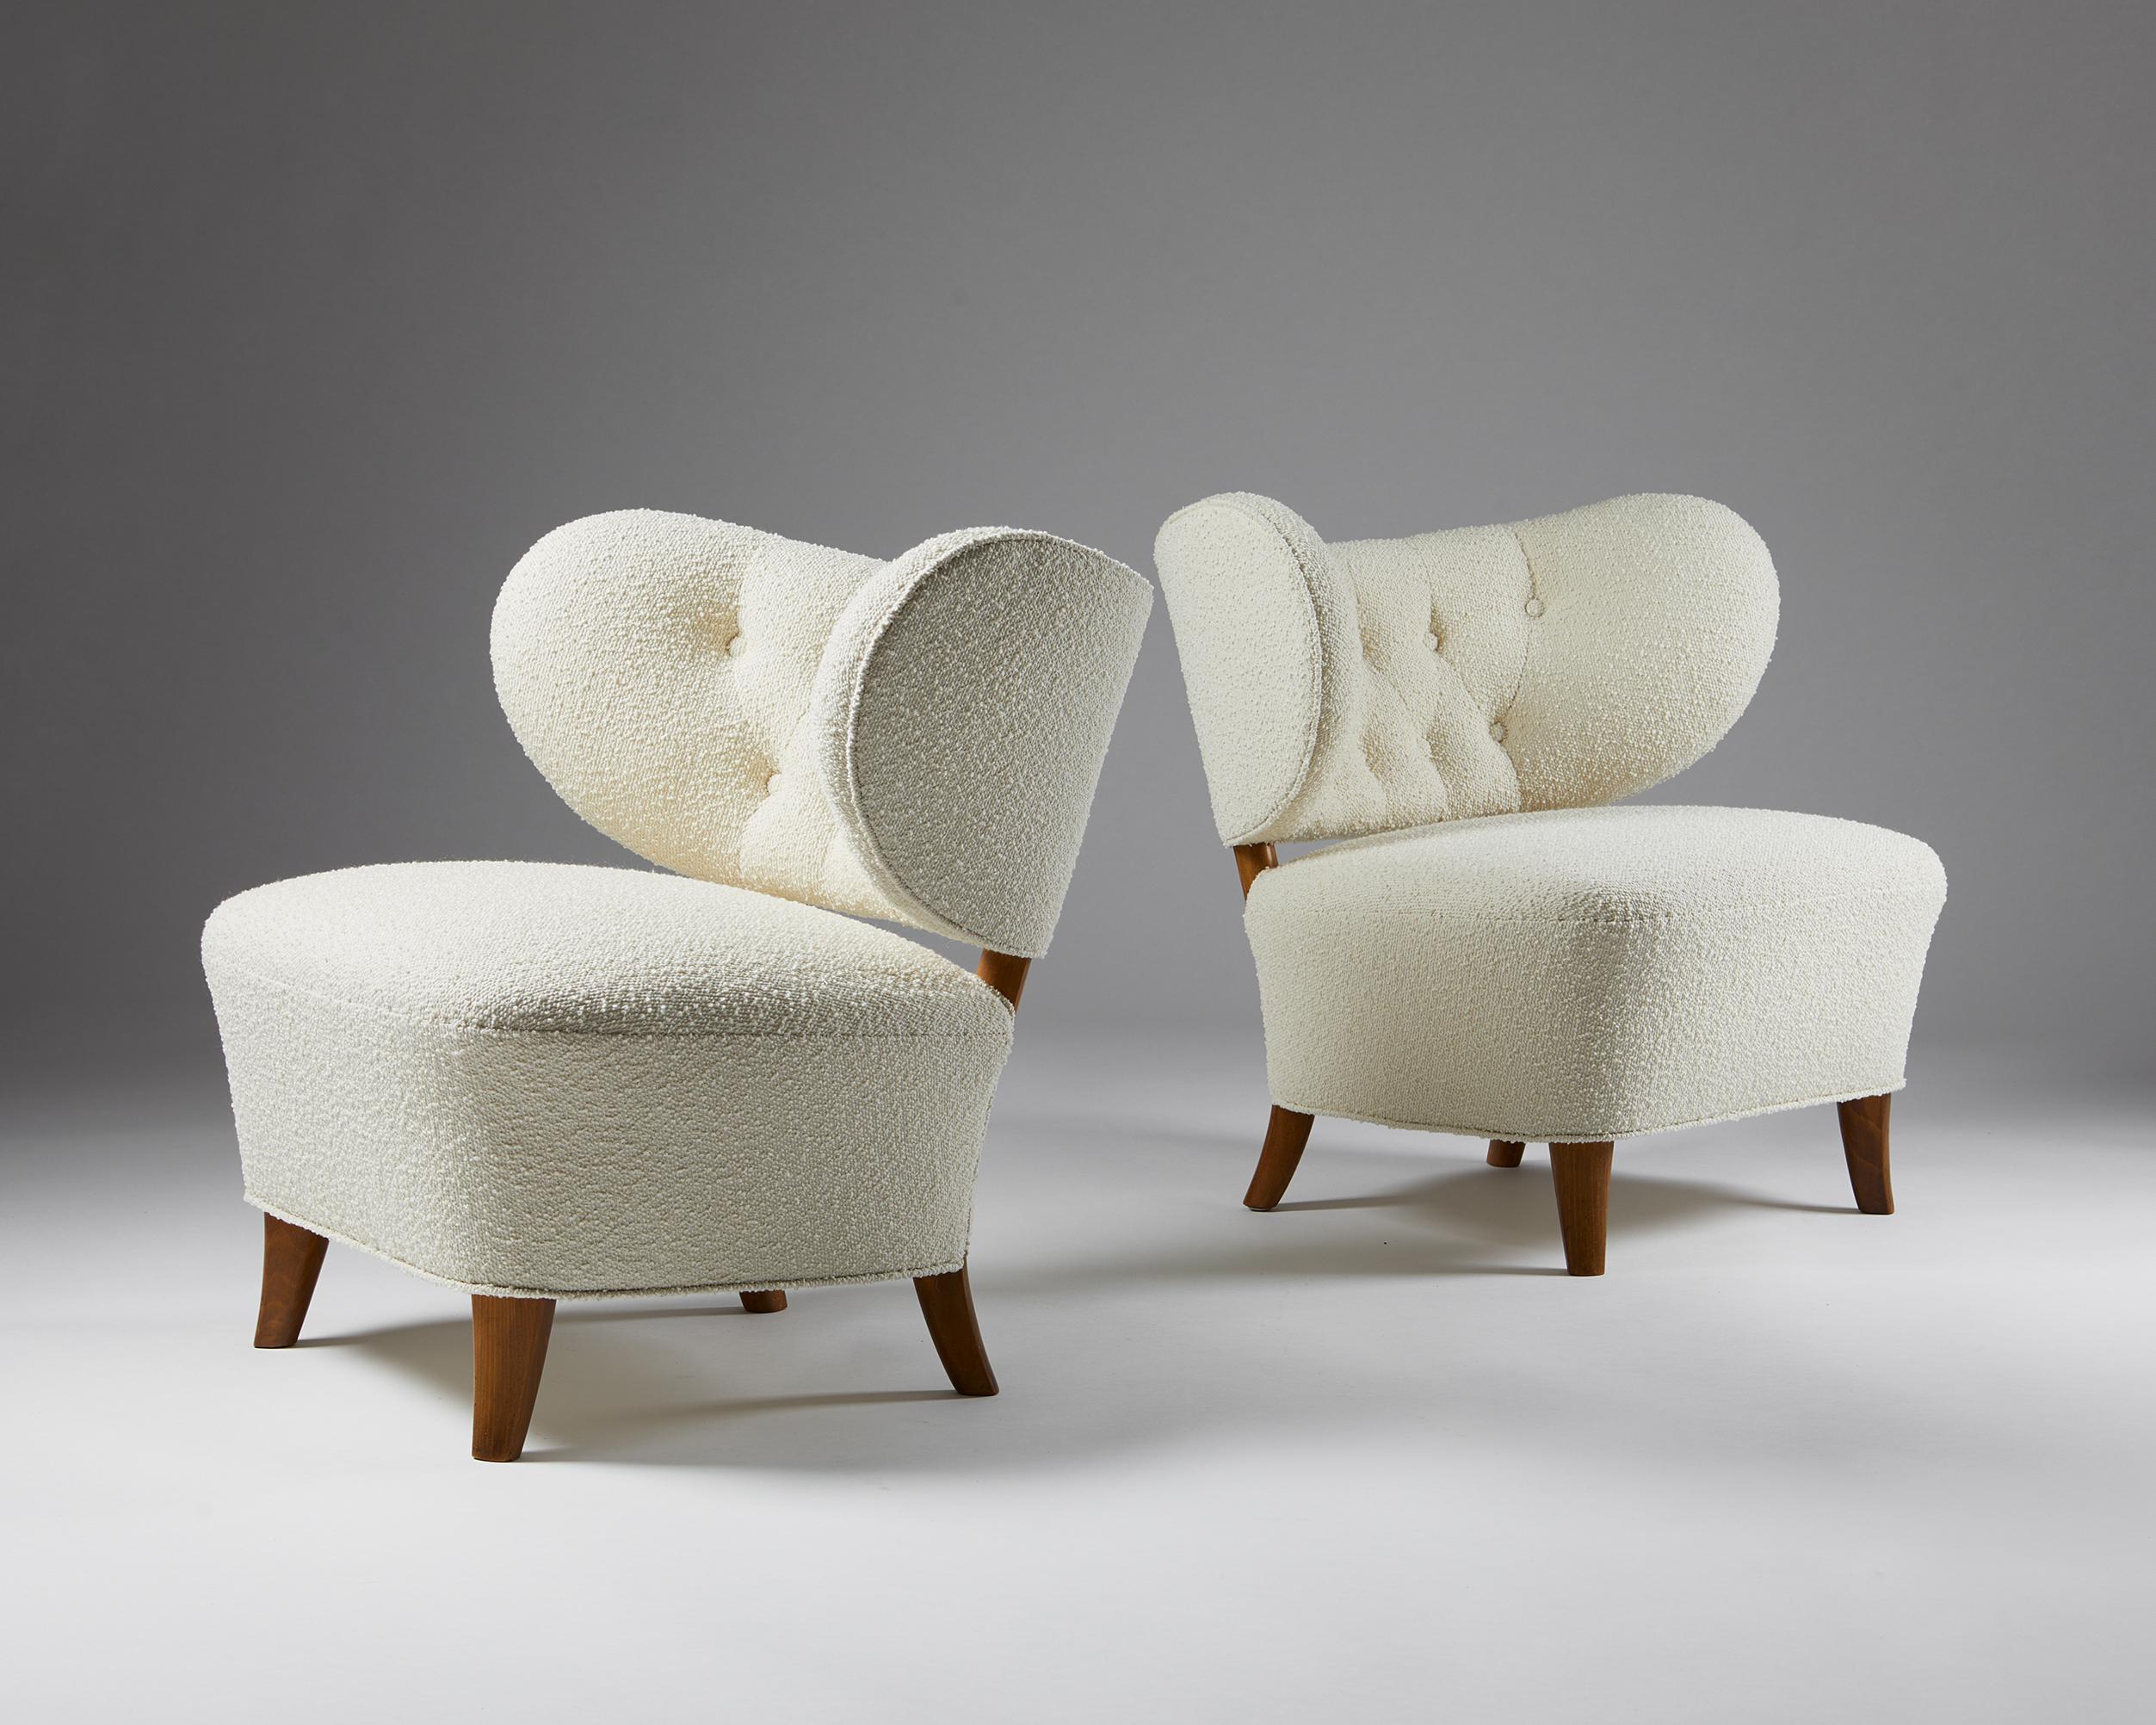 Pair of easy chairs designed by Otto Schulz for Boet,
Sweden, 1940s.

Wool upholstery and lacquered wood.


This Schulz model is one of the designer’s rarest and finest chairs. Both chairs are newly reupholstered in the most luxurious Boucle fabric